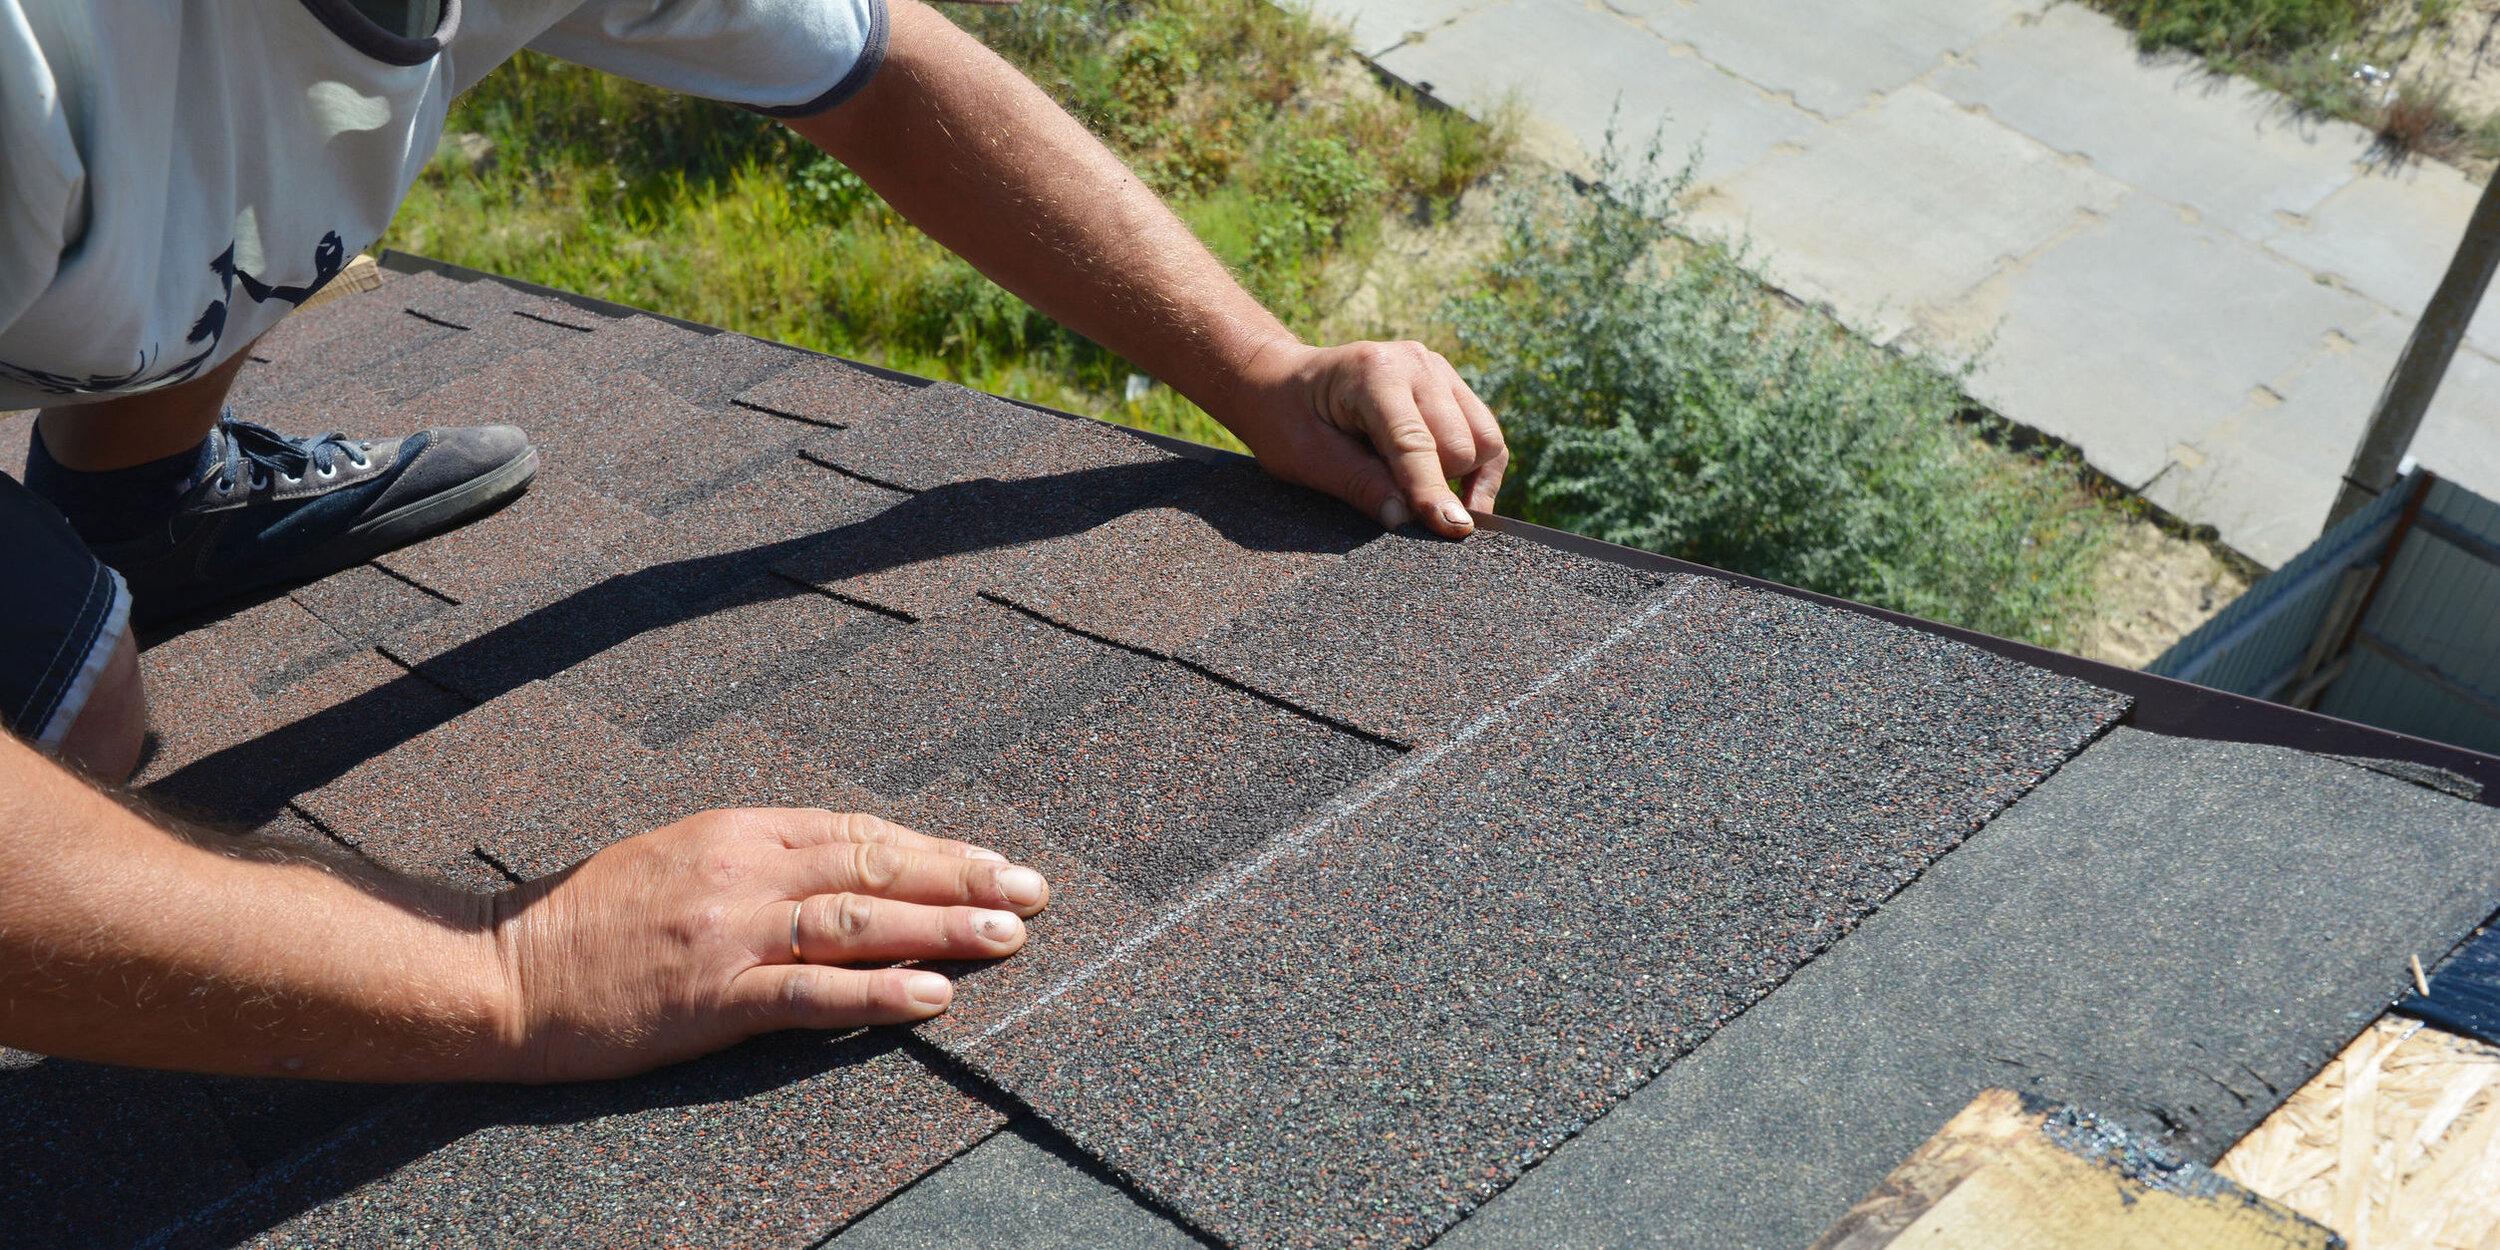 What to Look for When Choosing a Residential Roofing Contractor